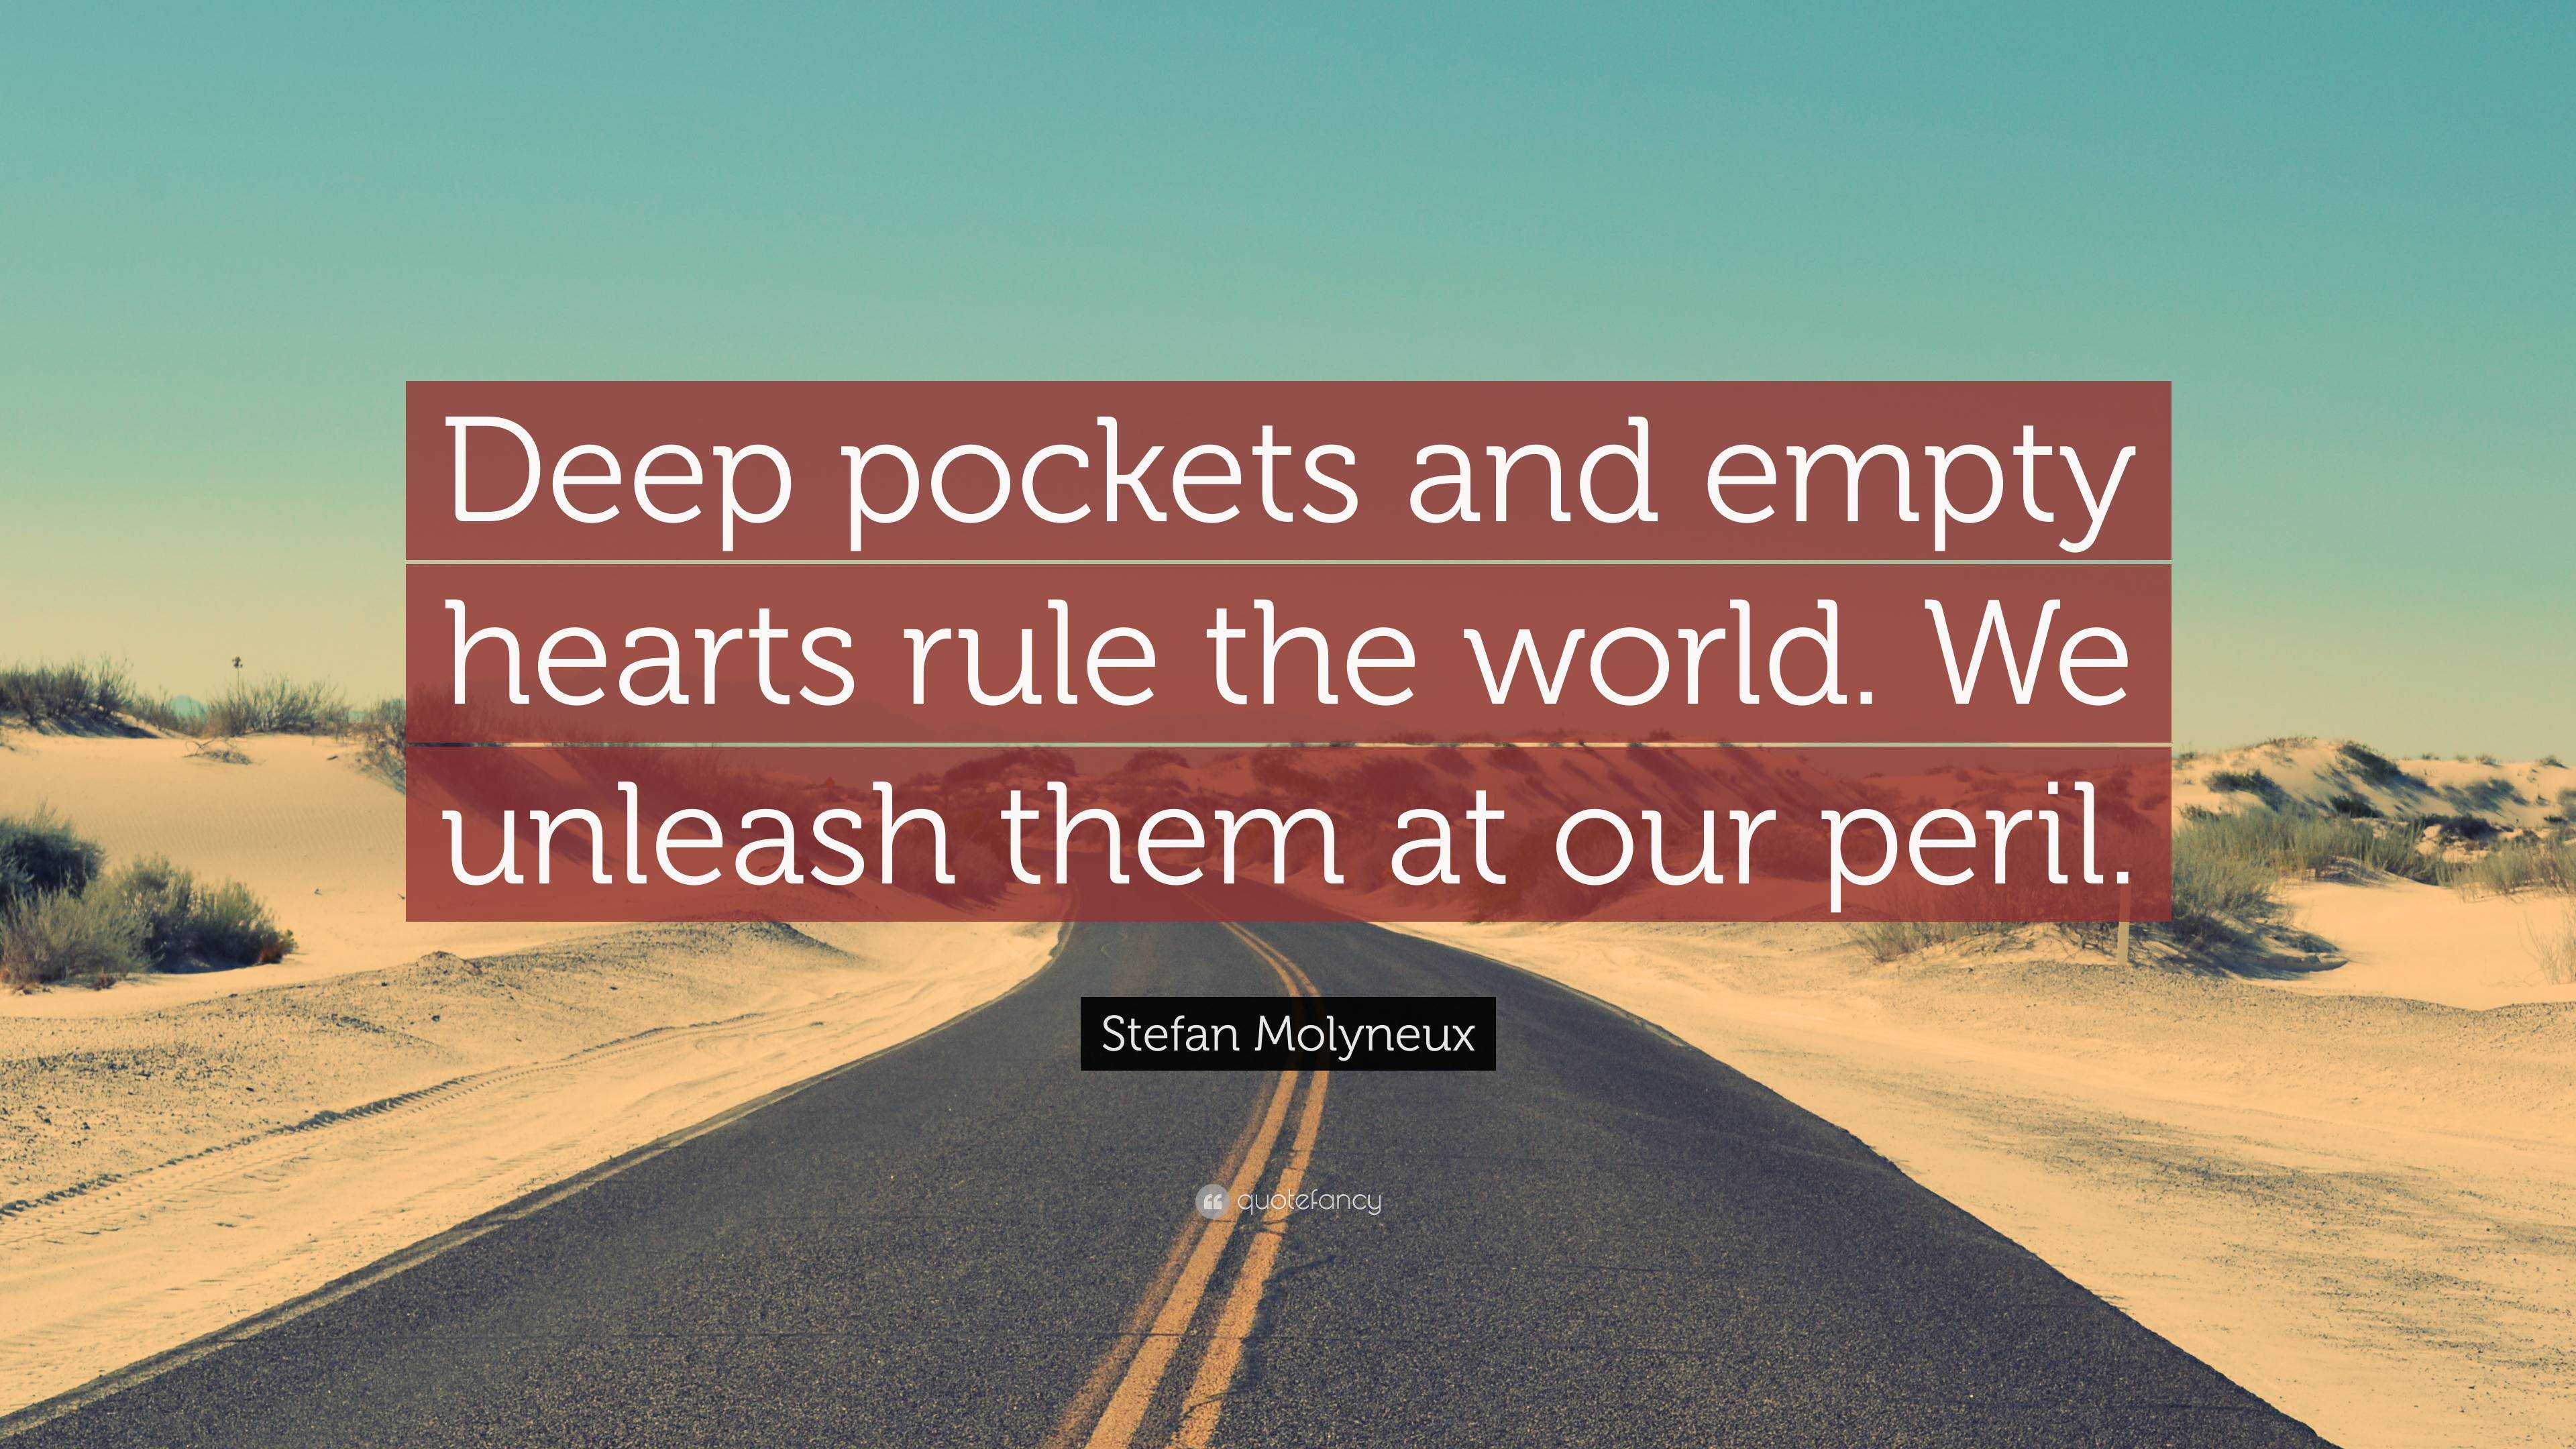 Stefan Molyneux Quote: “Deep pockets and empty hearts rule the world. We  unleash them at our